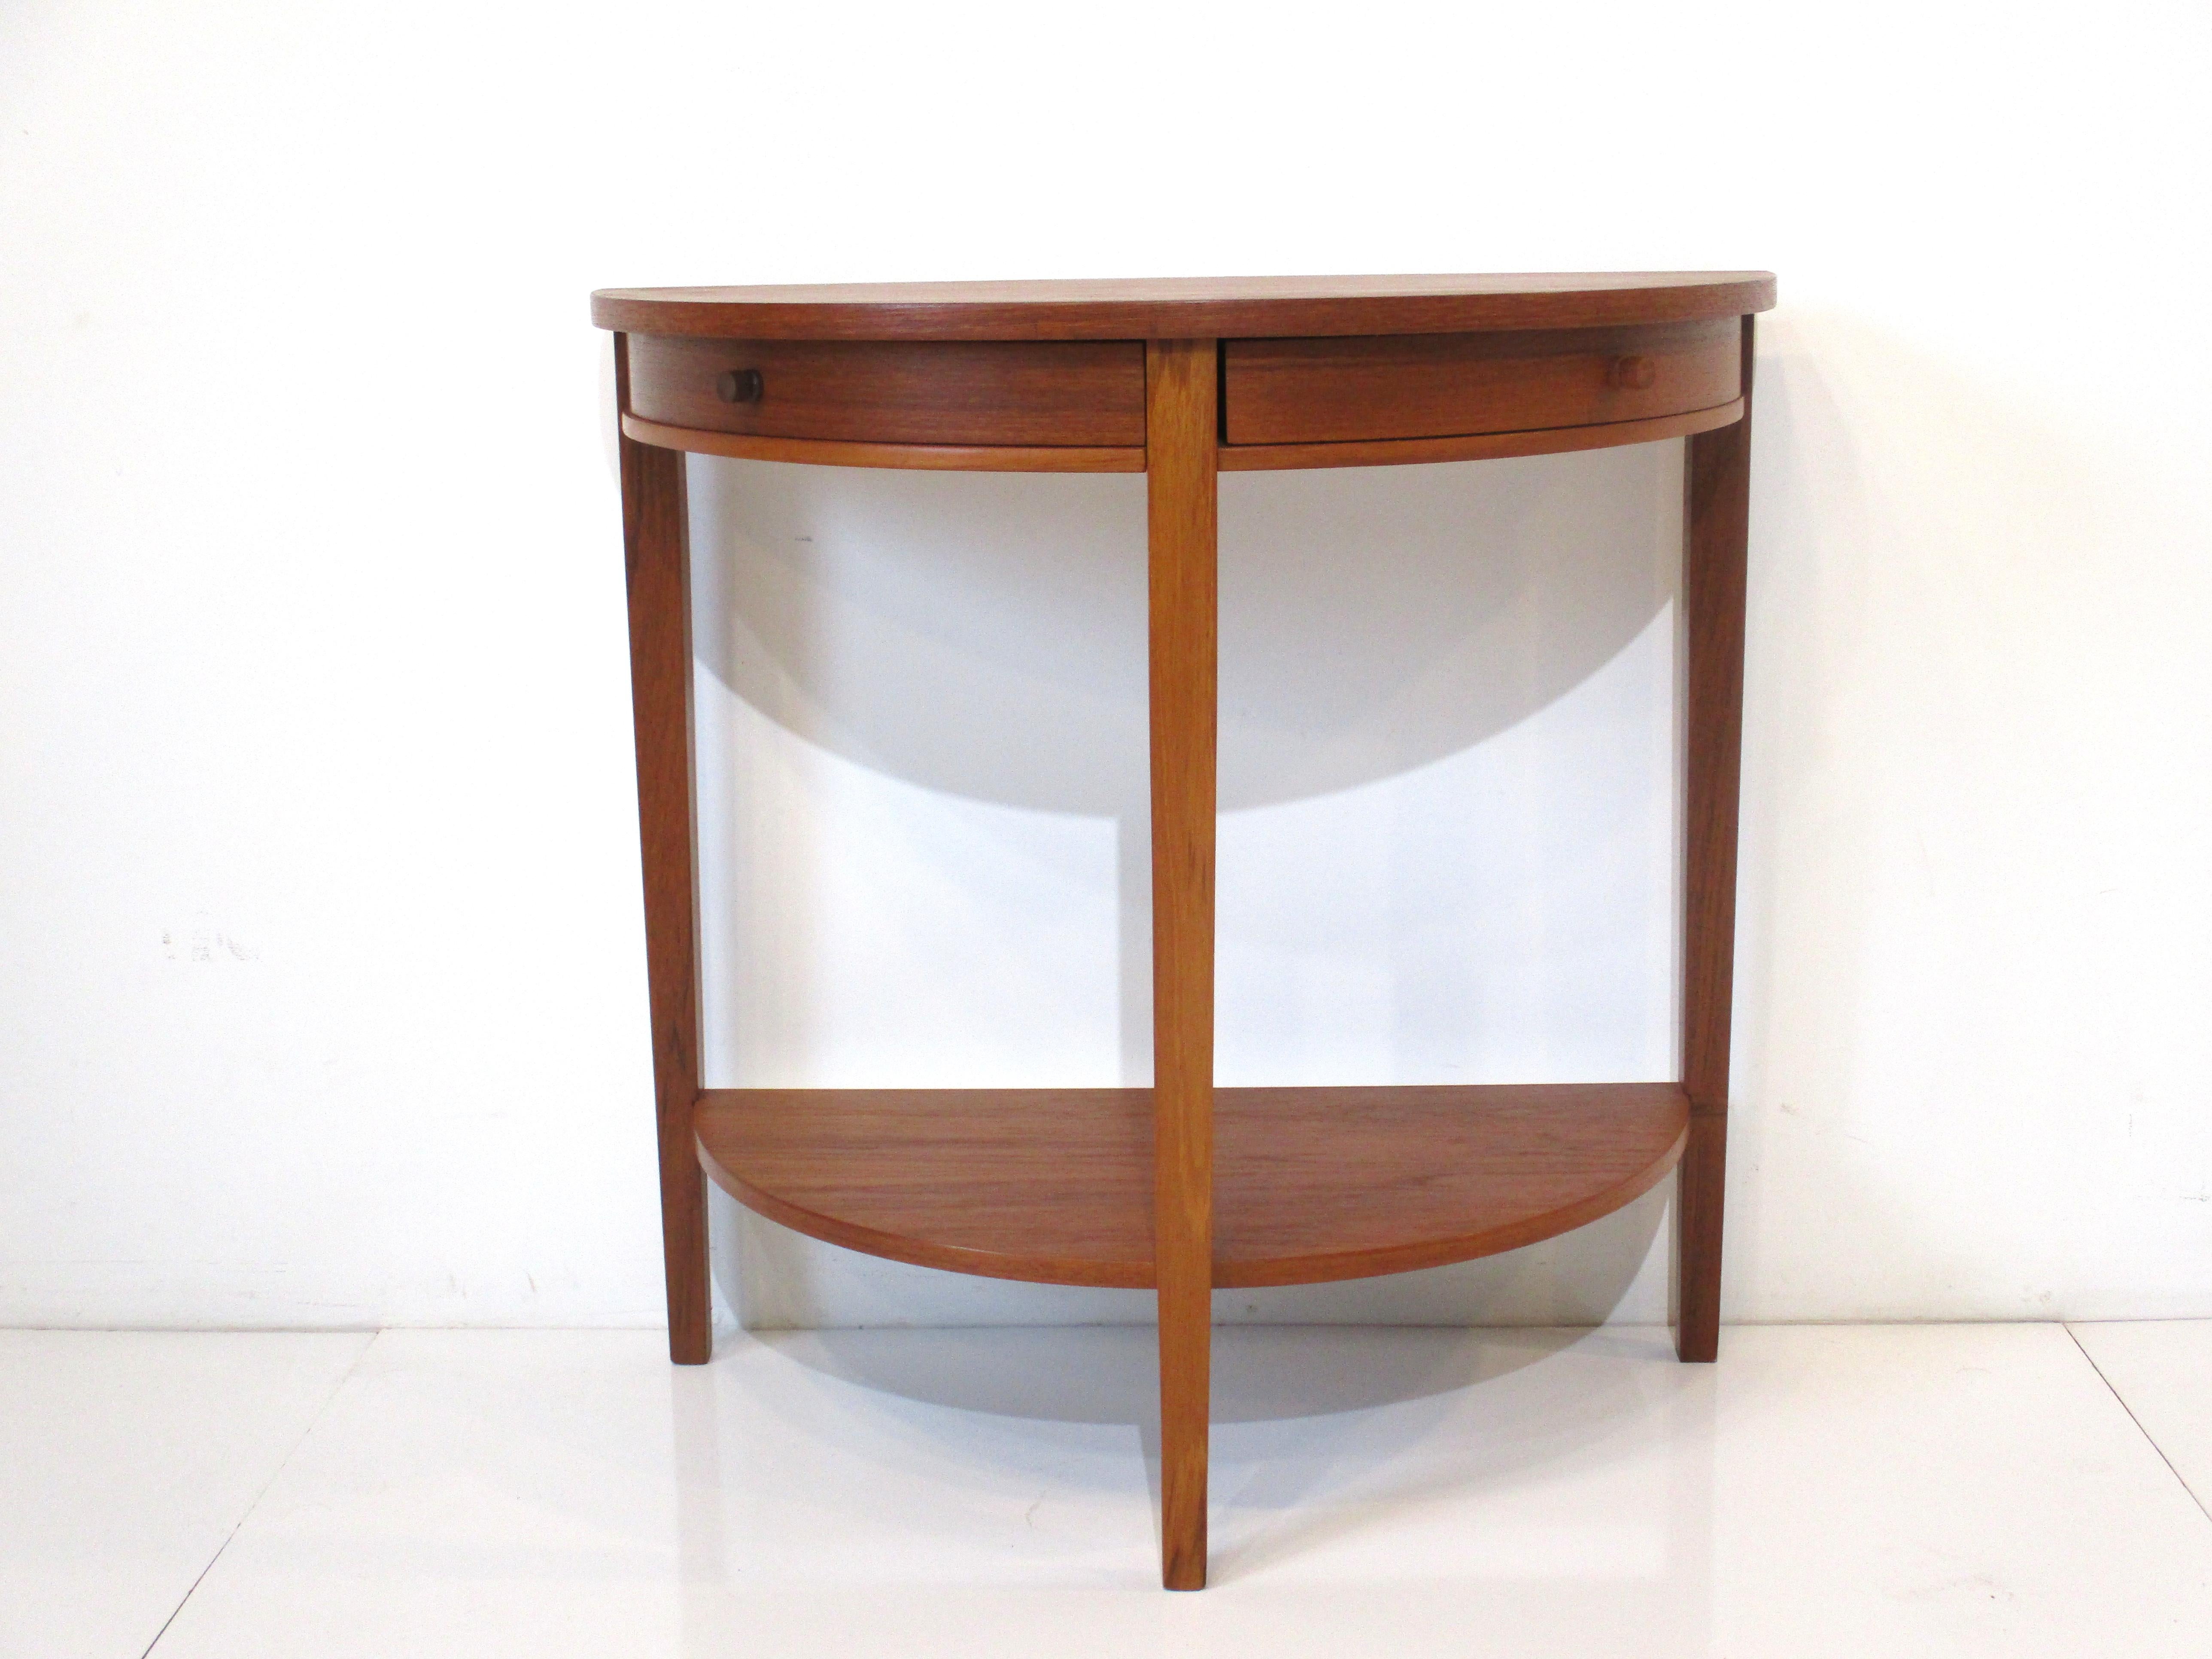 A wonderful half moon shaped hall or entrance way teak table with two drawers that neatly swing out having turned teak knobs. Siting on three sturdy legs and having a lower shelve handcrafted by Otmar known for his detail and finely designed pieces.